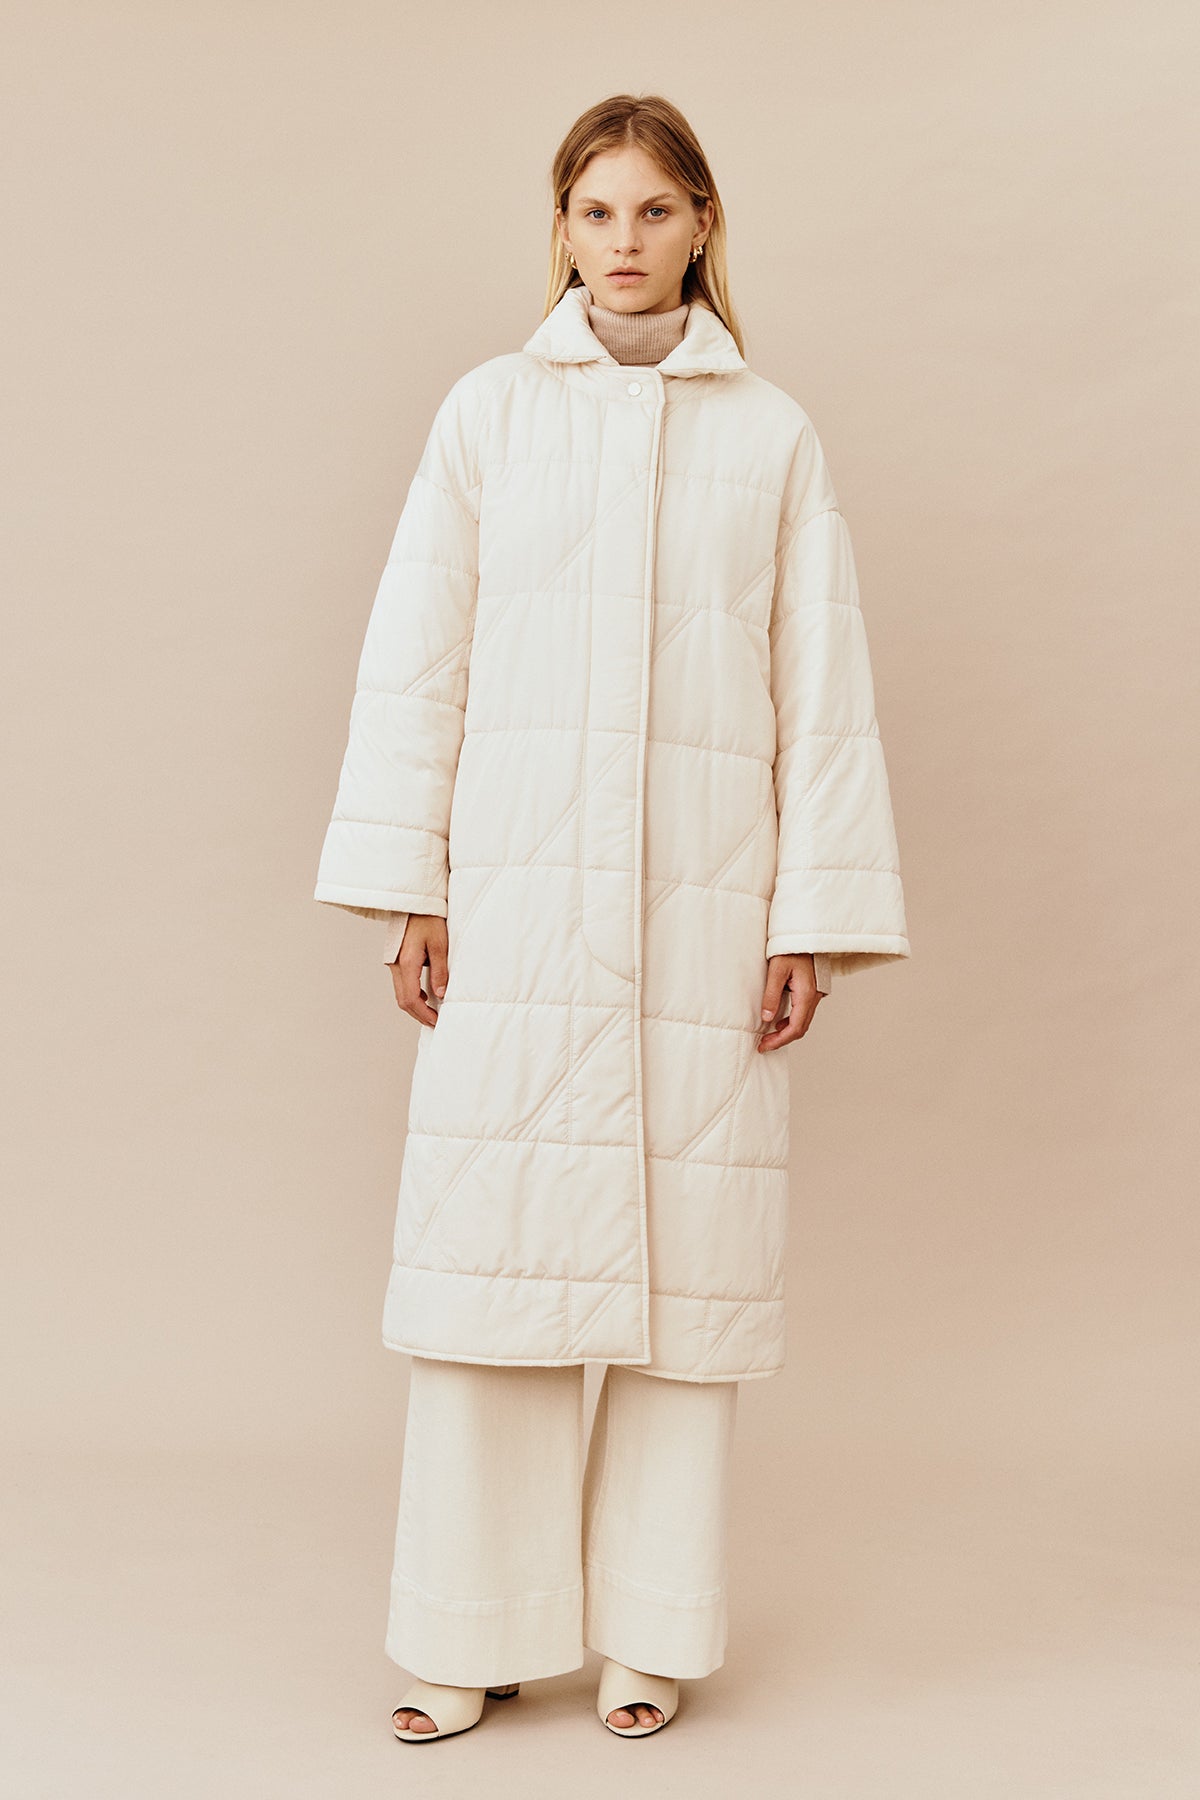 Model wearing the Australian luxury fashion designer GINGER & SMARTS' cream Sterling Quilted Coat featuring quilt detailing, lightweight design and is knee length.